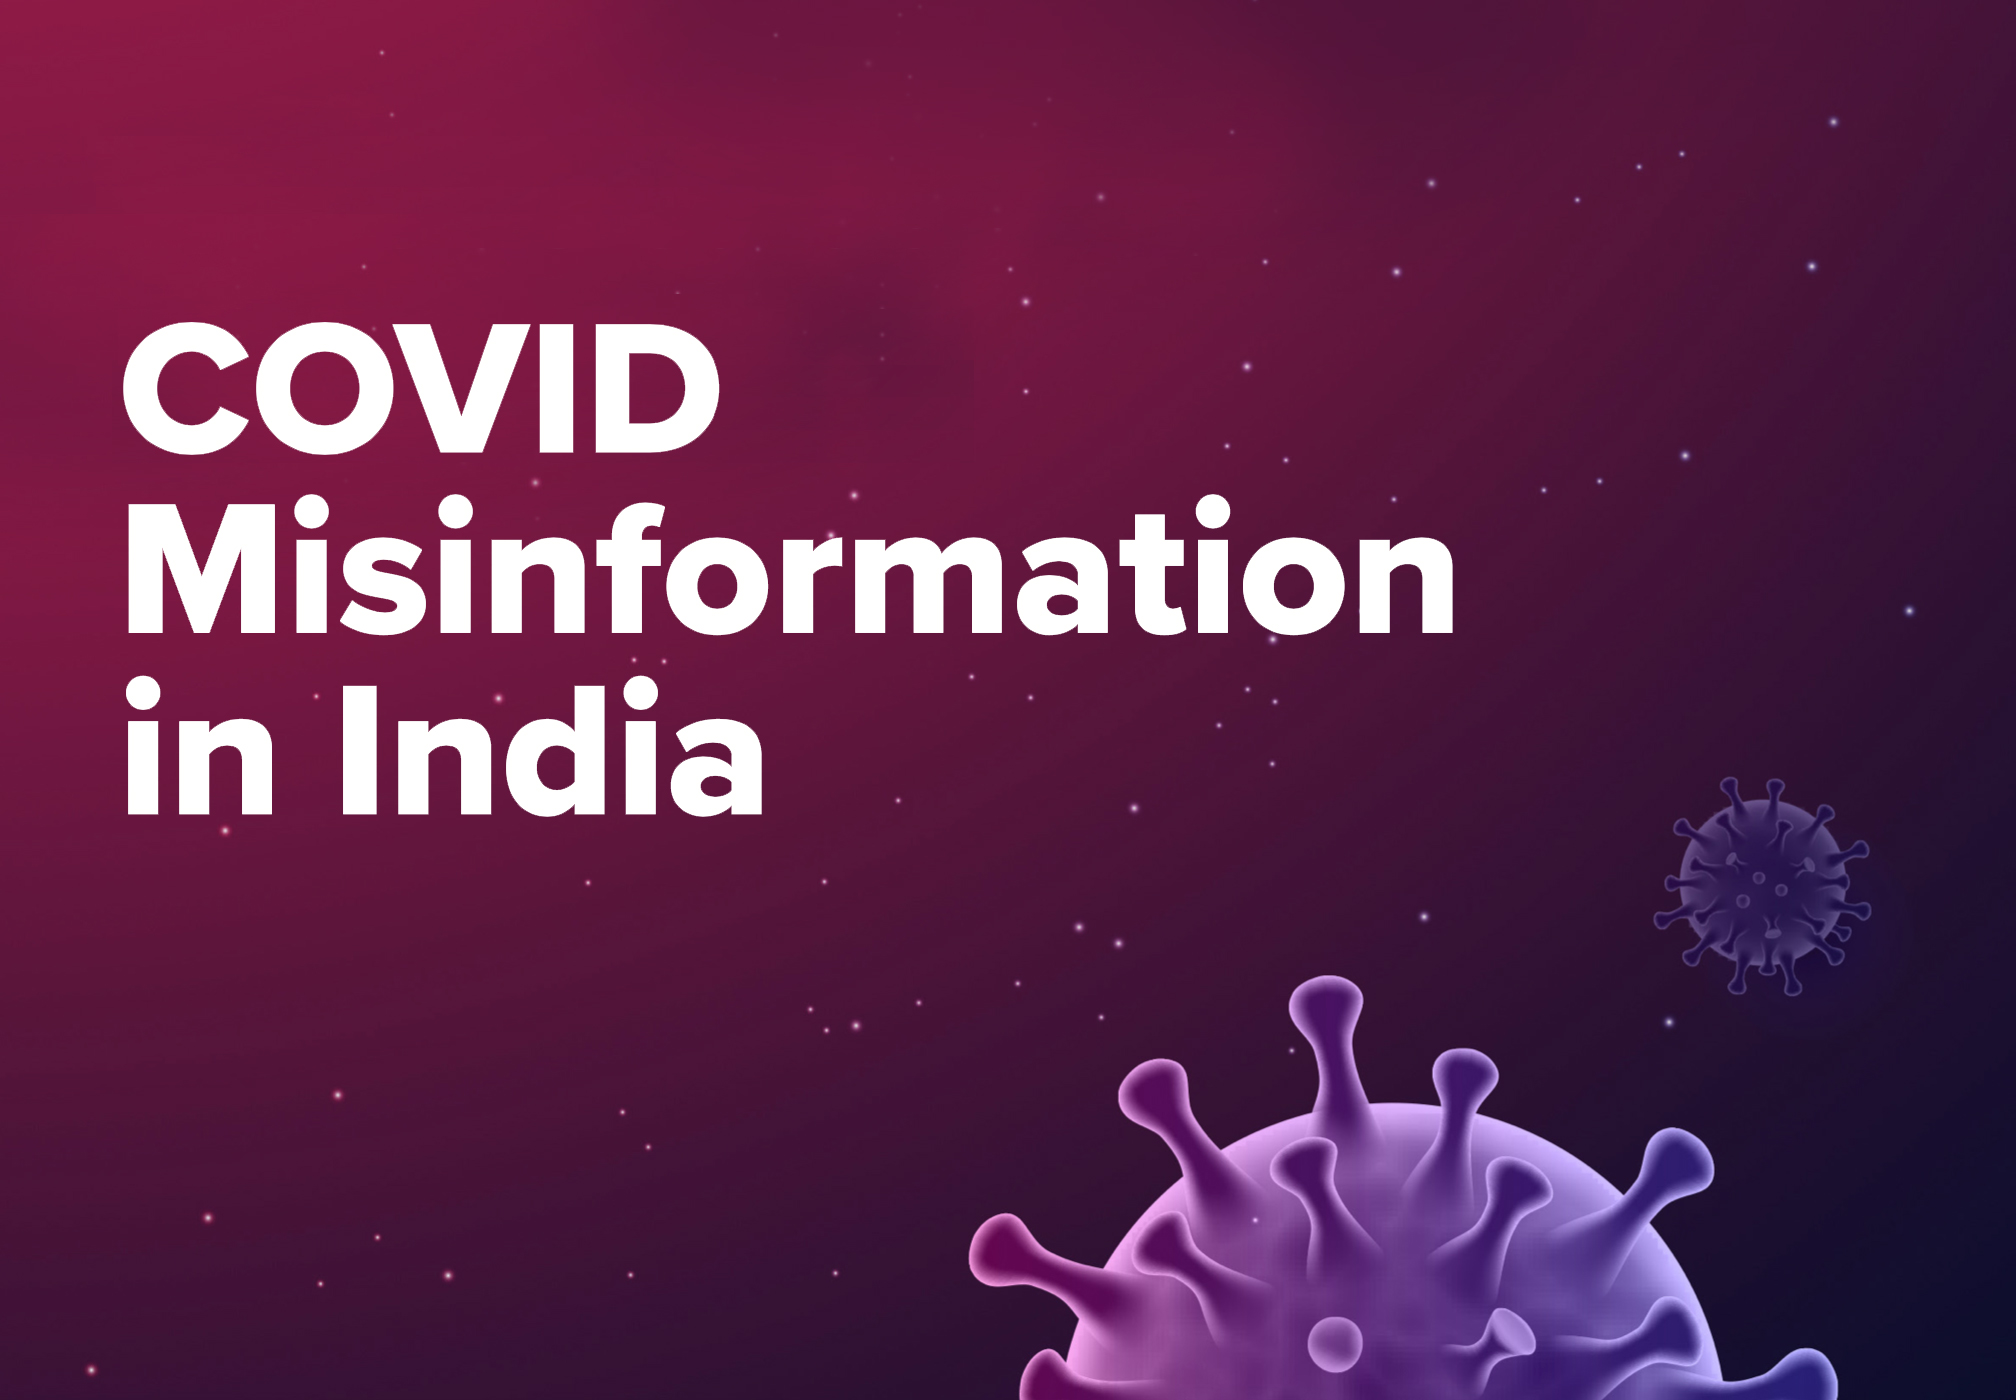 Logically Intelligence Report: The State of COVID Misinformation in India